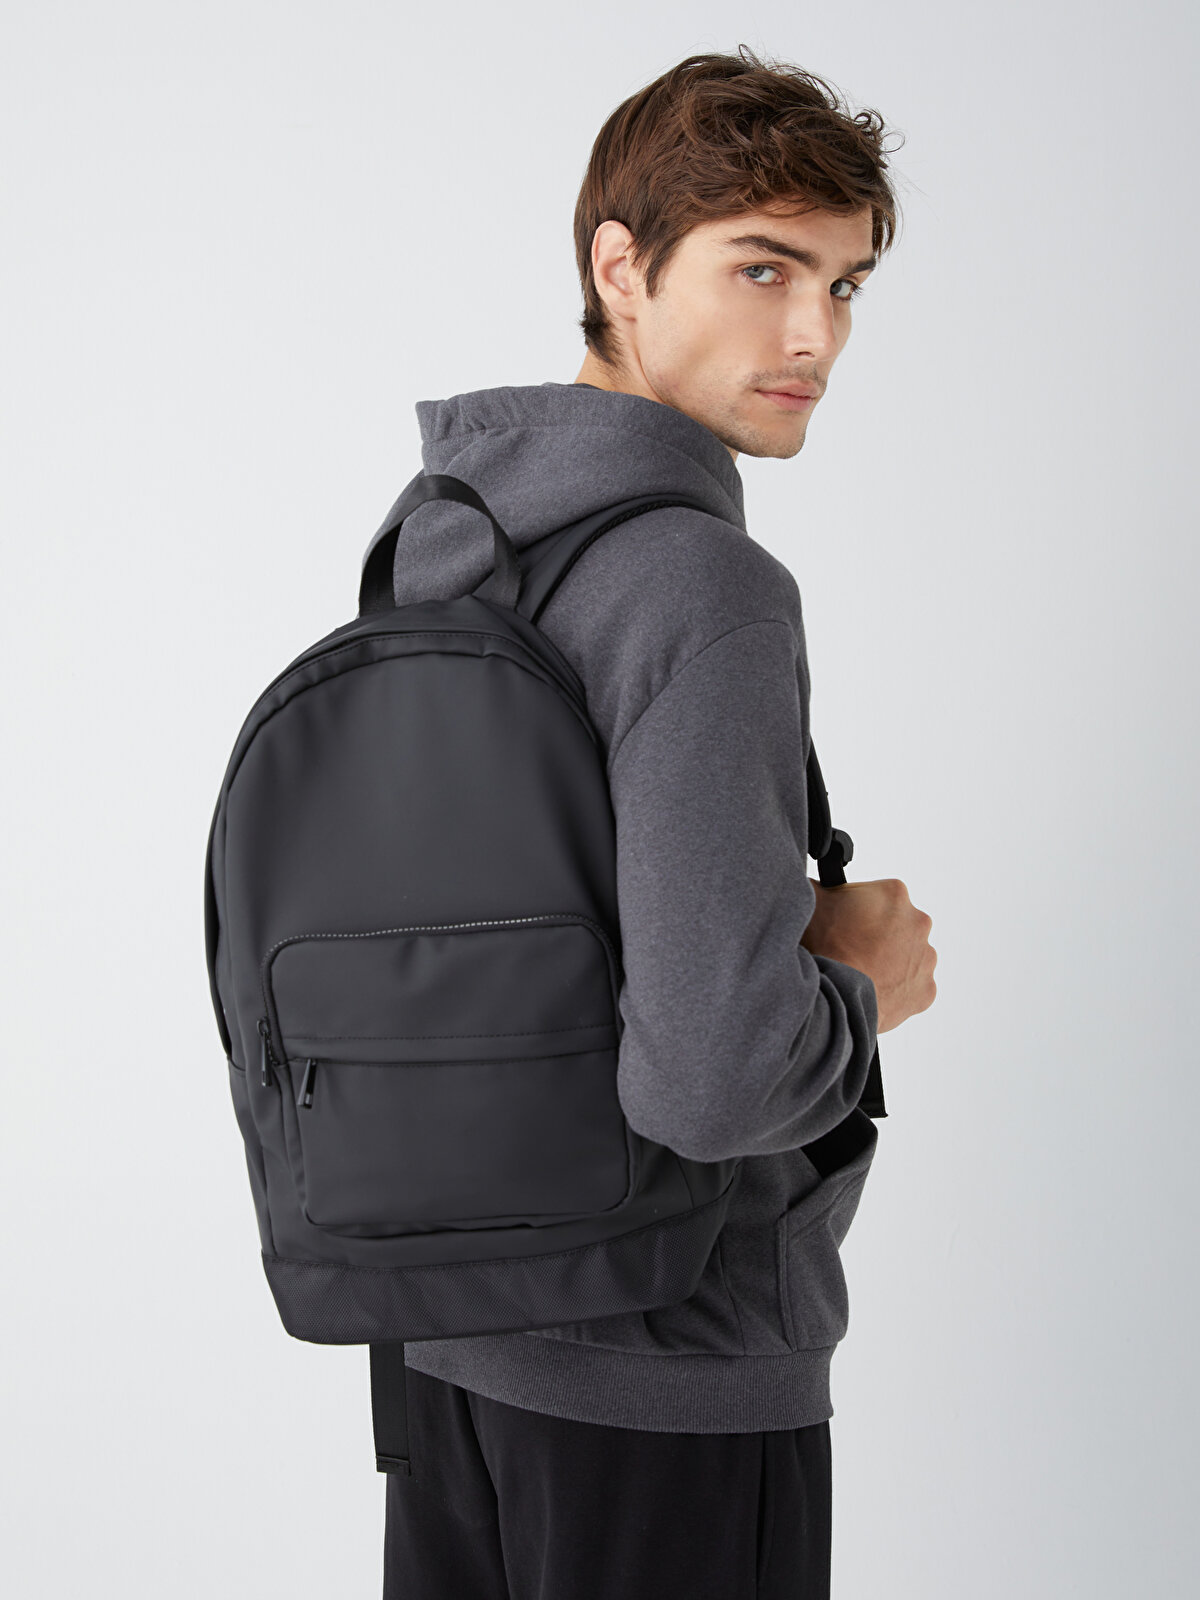 Men's Backpack with Multi Pocket Laptop Compartment -W3BS30Z8-HUC -  W3BS30Z8-HUC - LC Waikiki